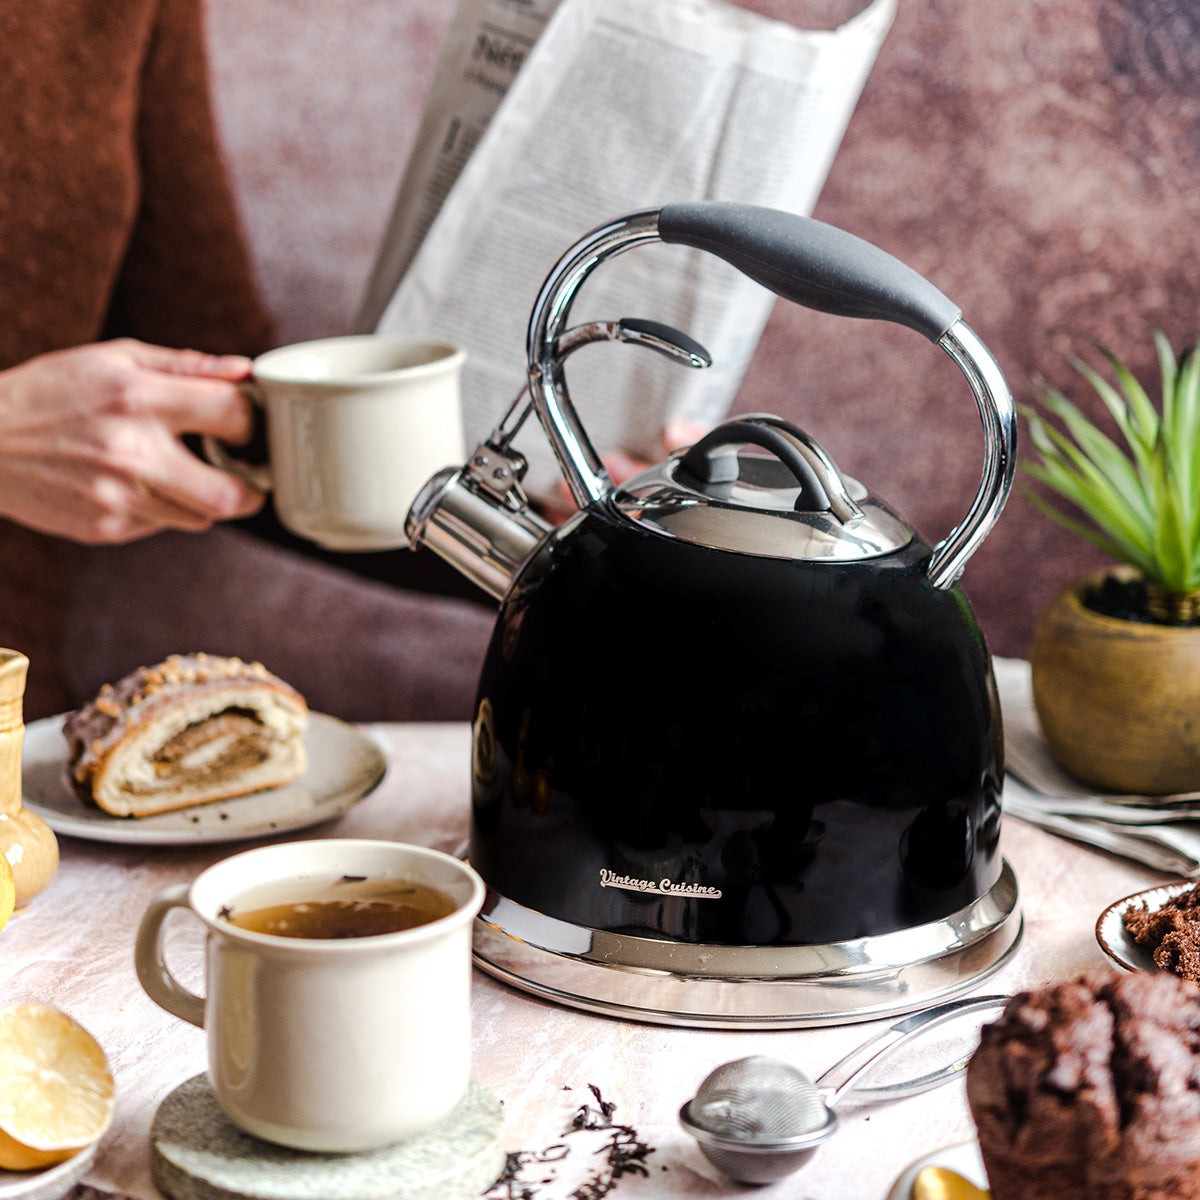 Traditional retro kettle with whistle Vintage Cuisine